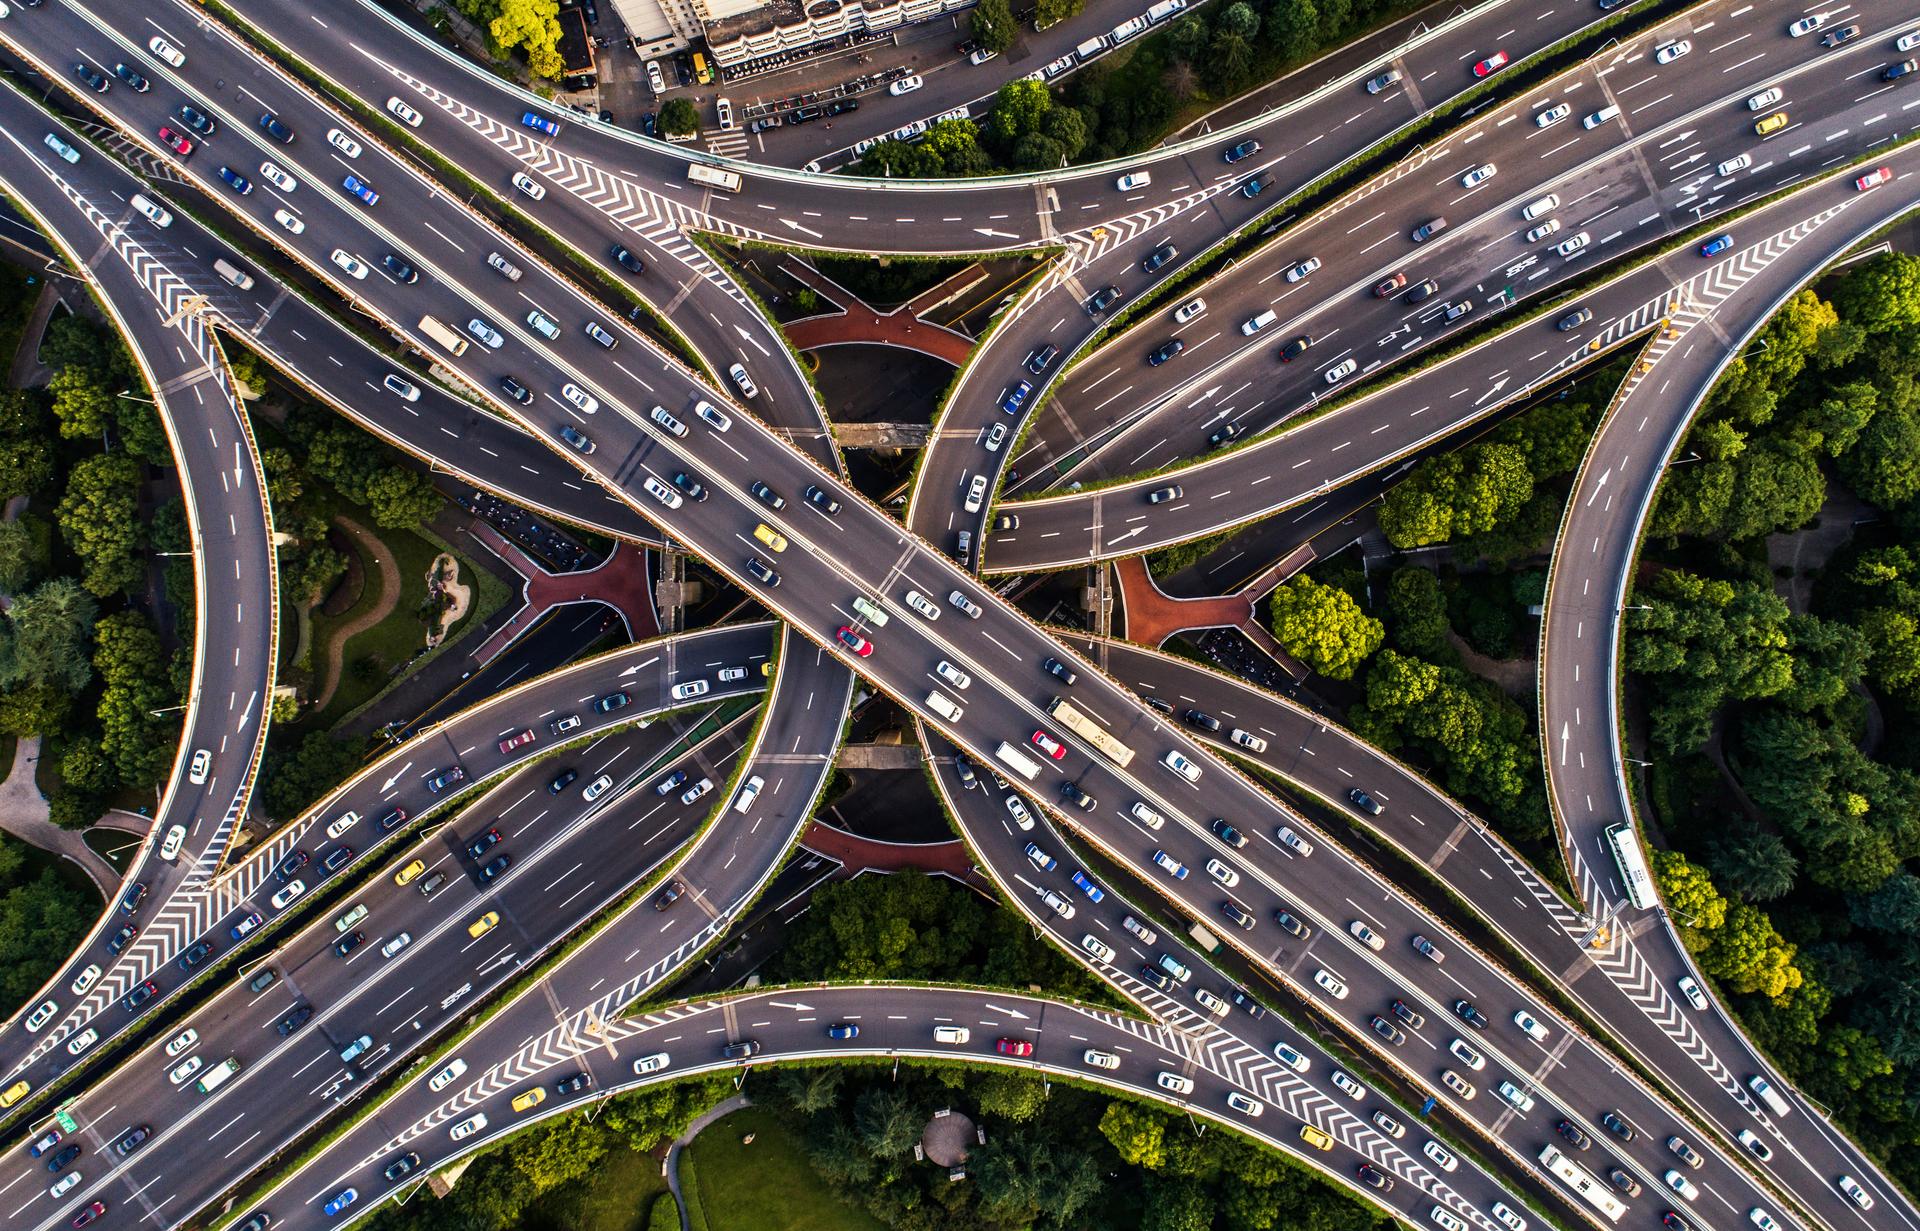 A bird's eye view of a highway with lots of traffic